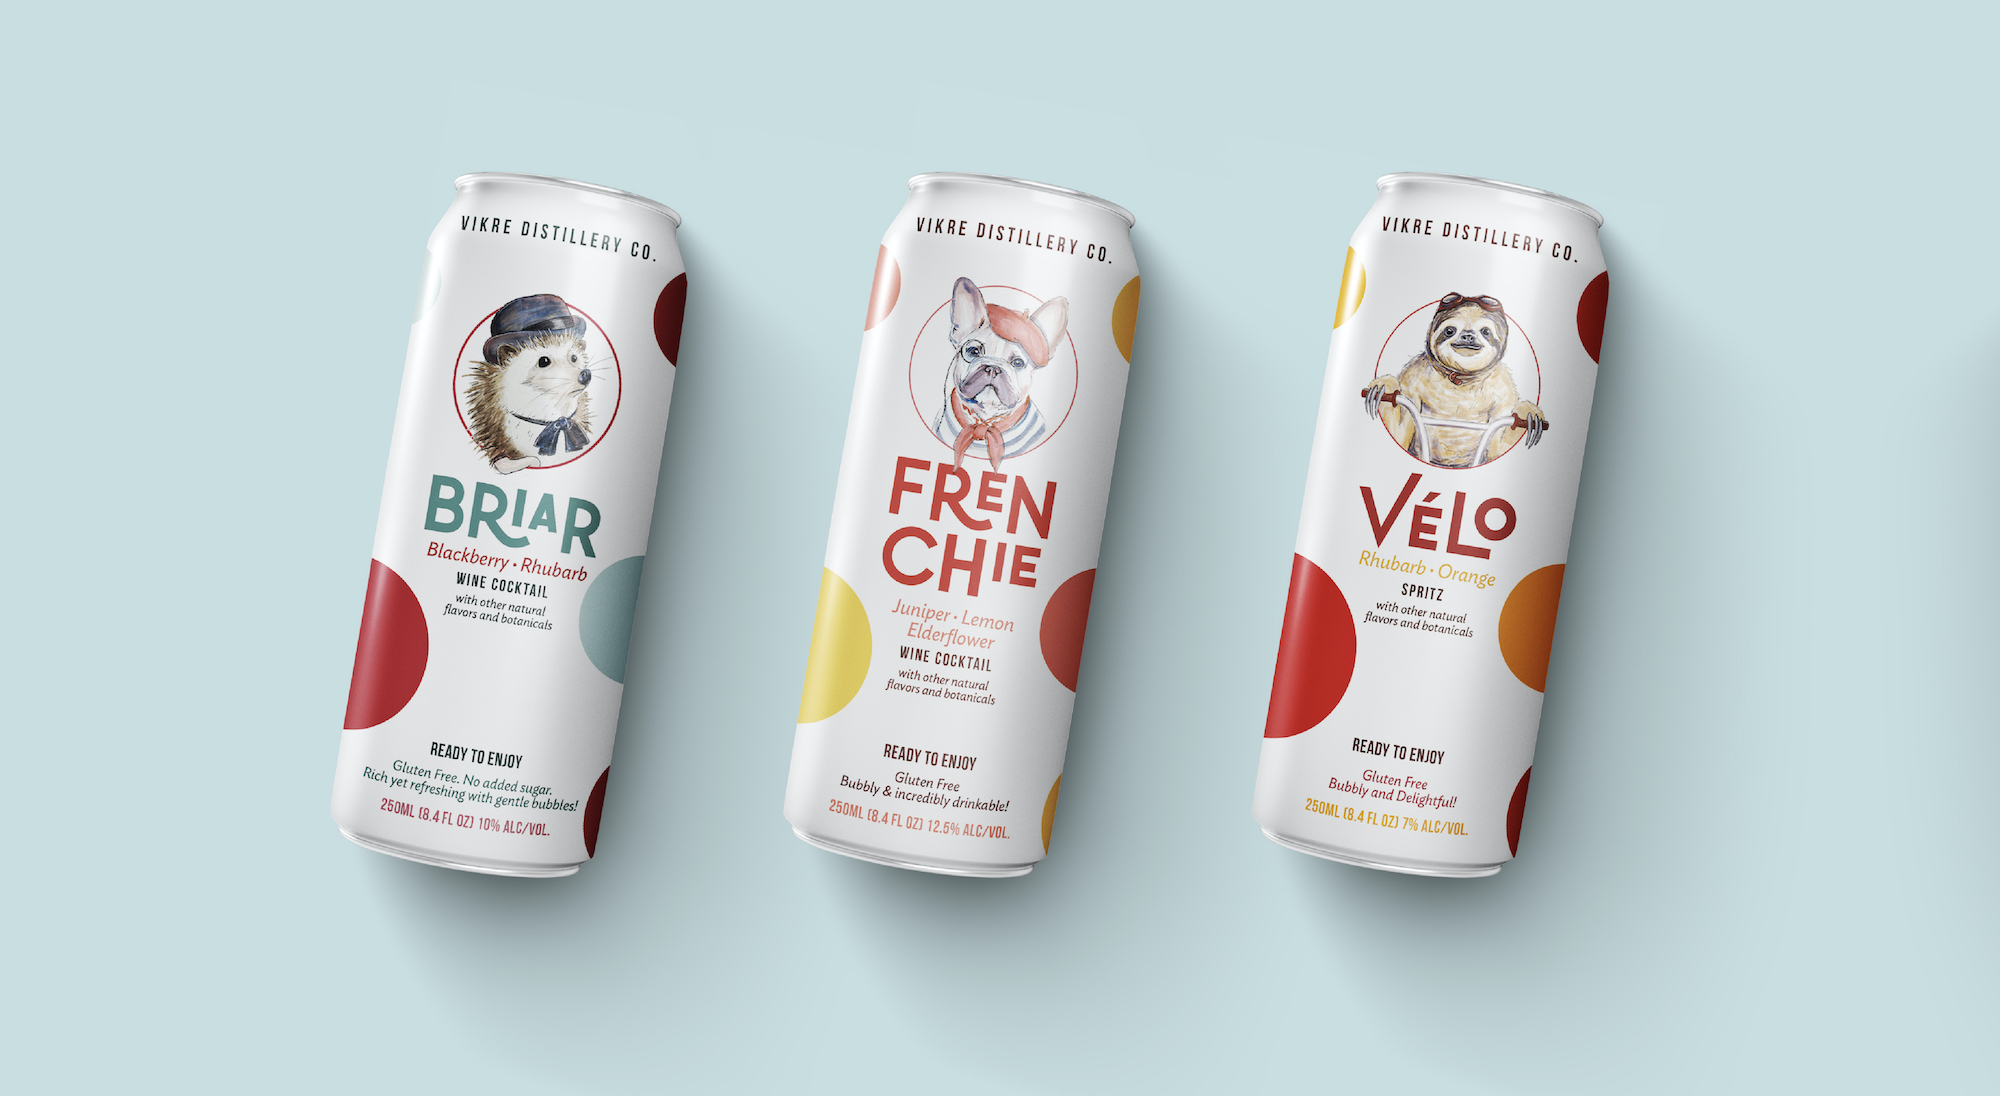 Frenchie and Friend canned cocktail, packaging designed by Šek Design Studio